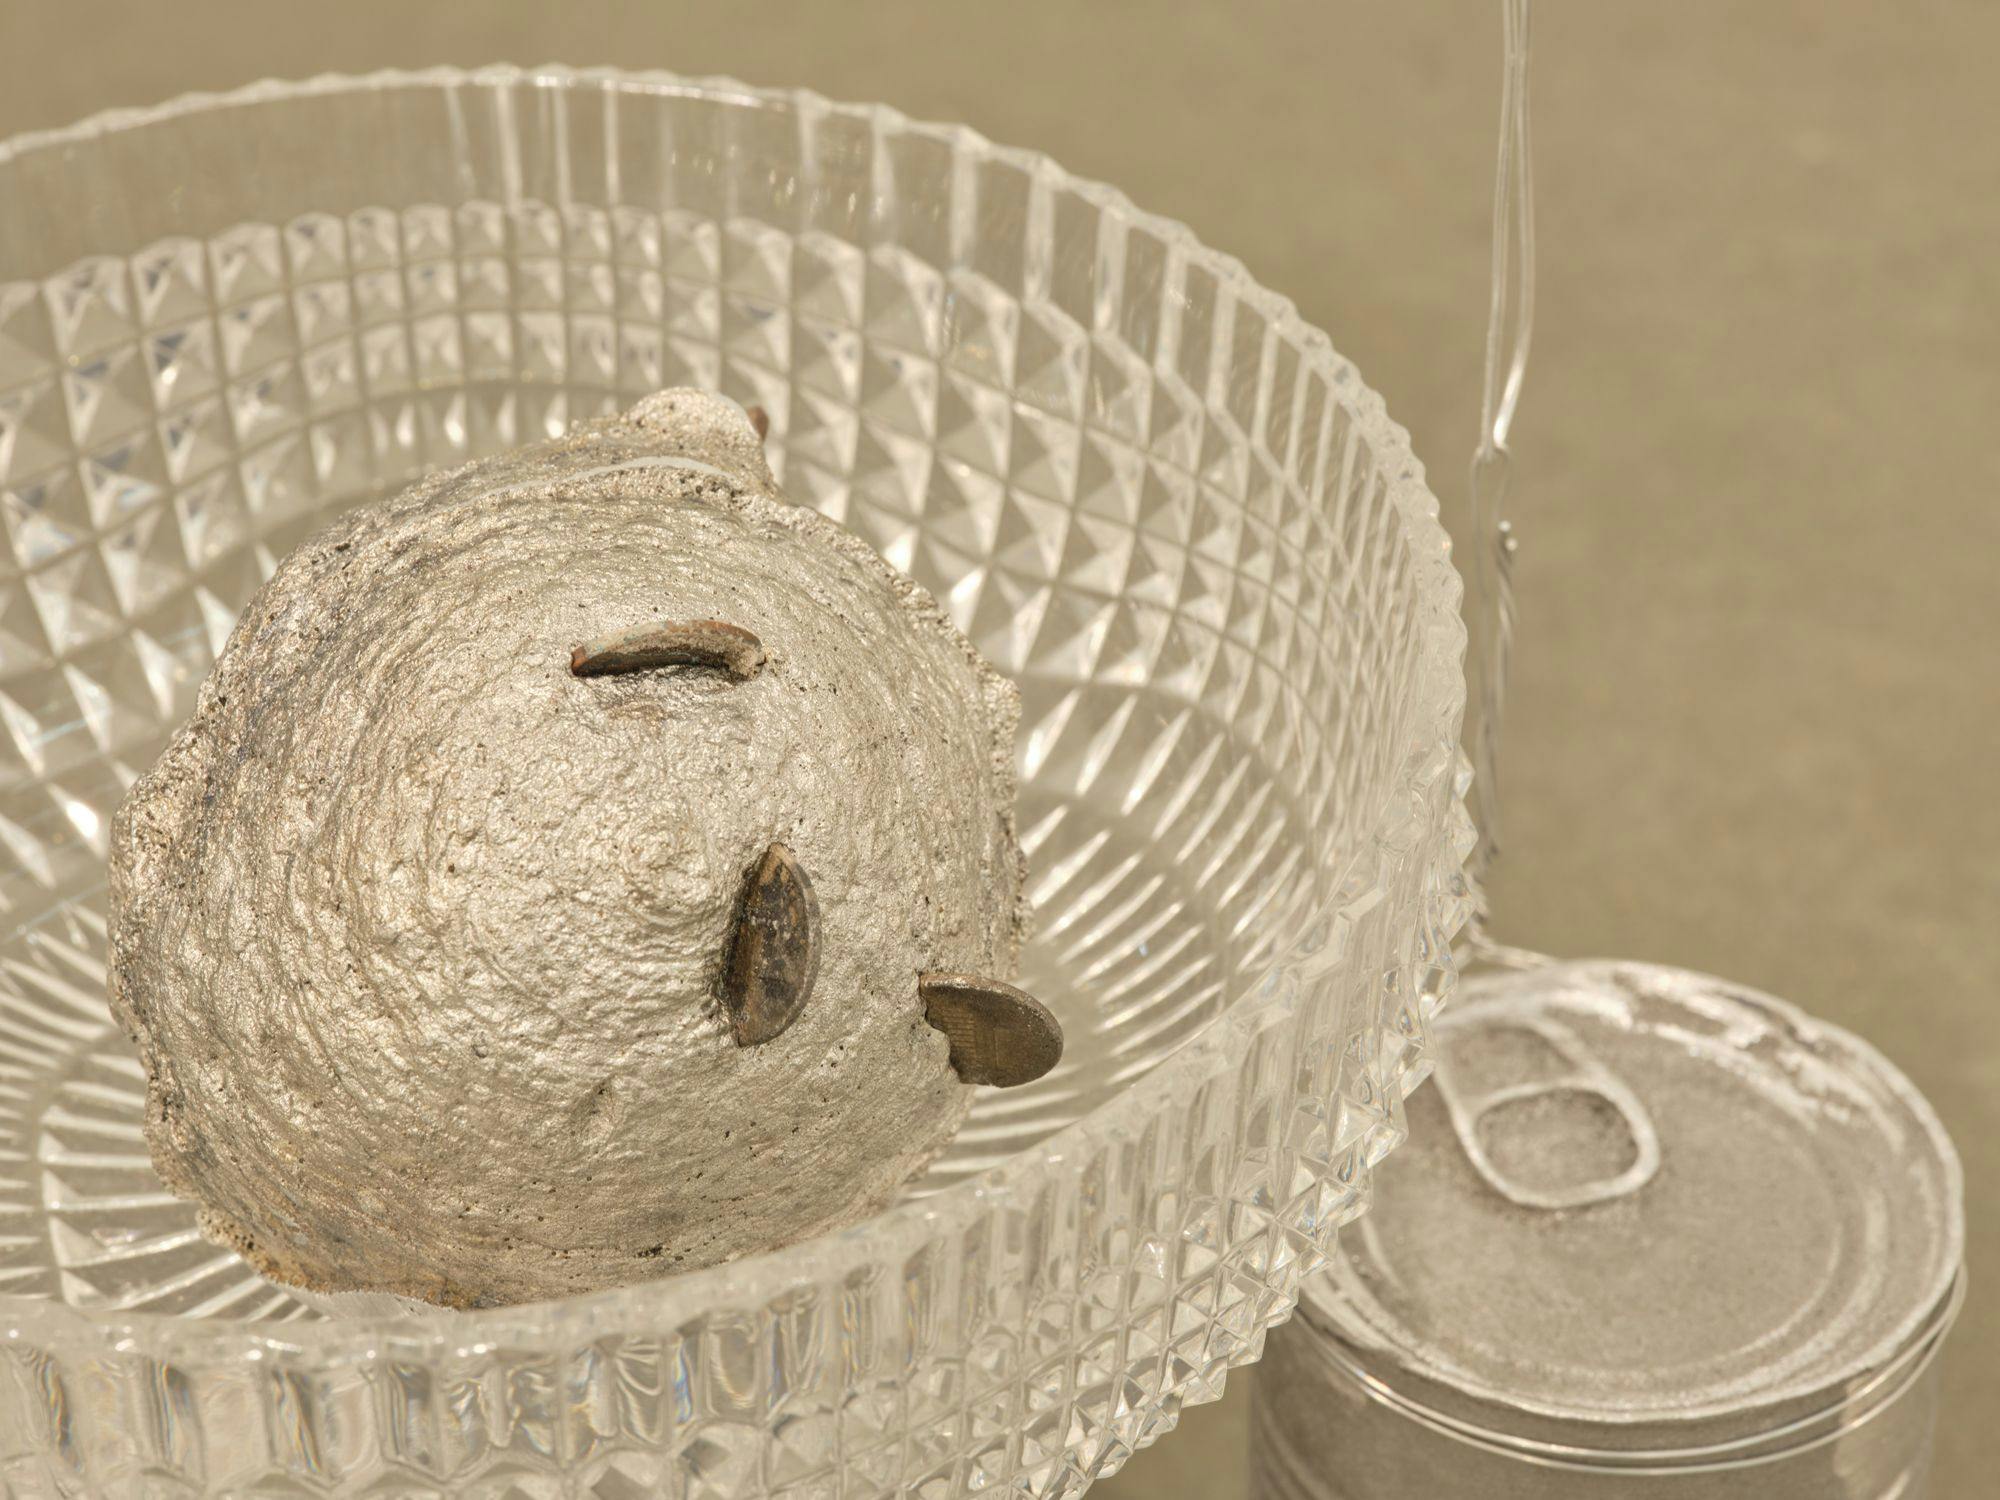 A detail of a sculpture comprised of glass bowls, wire, aluminum cans, and a ball with copper coins sticking out.